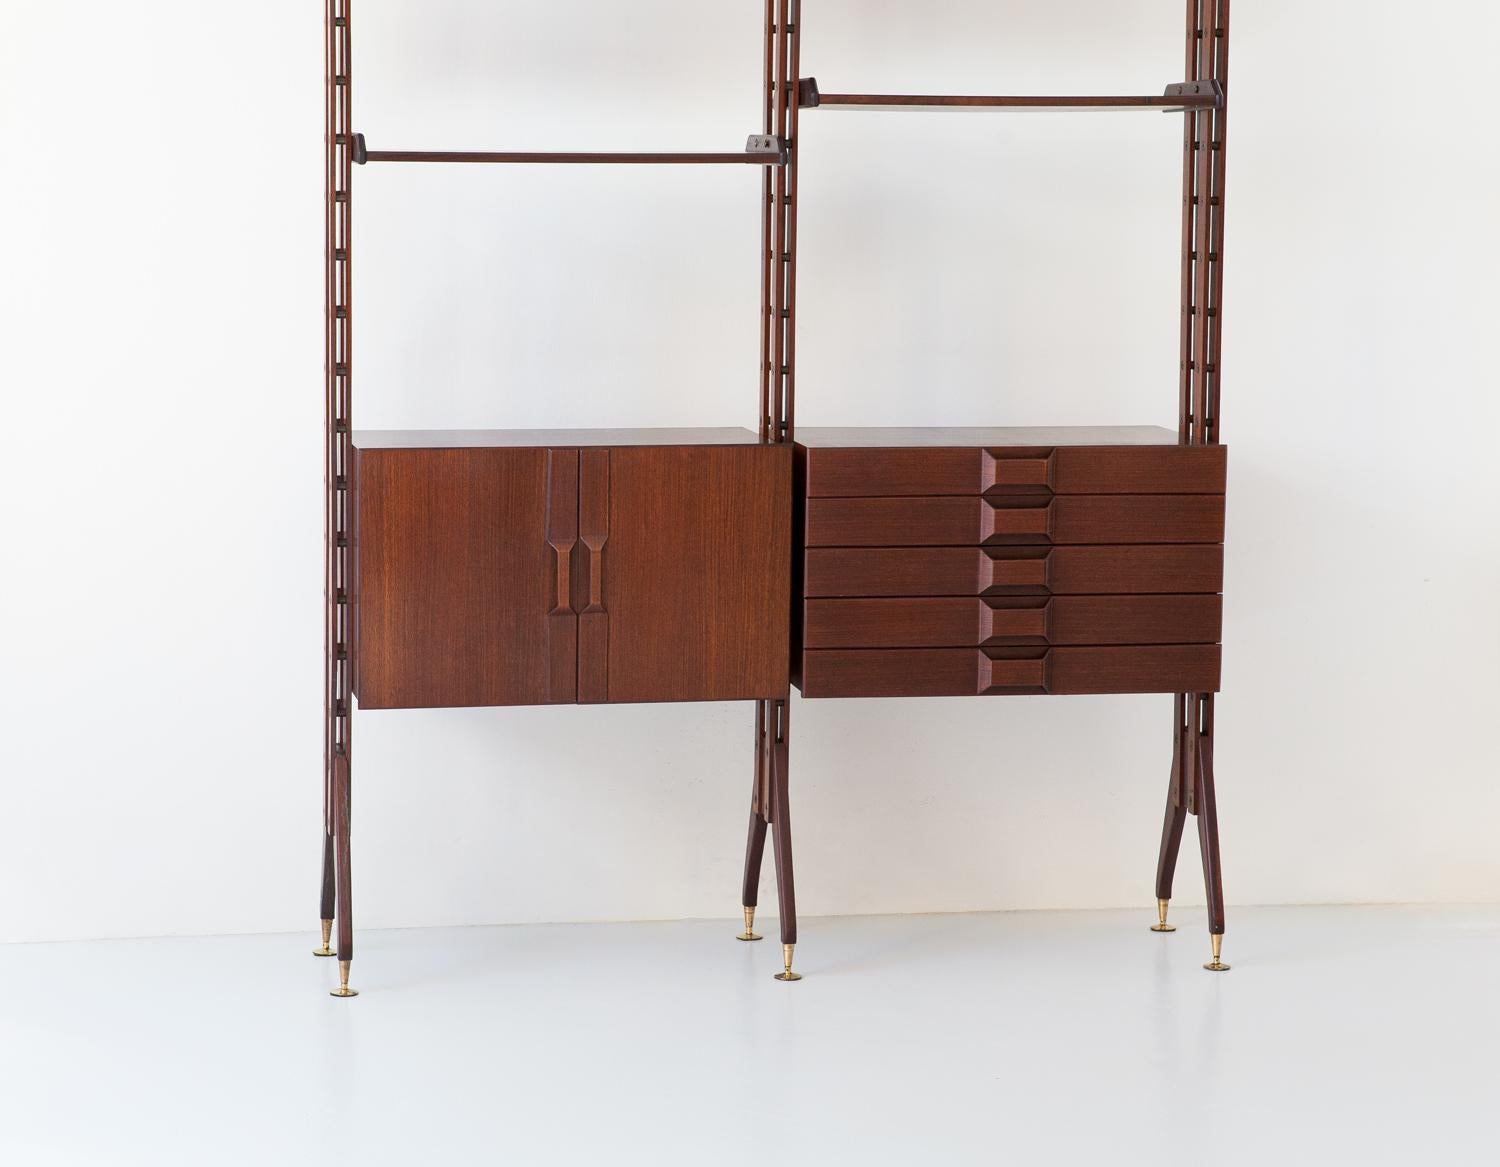 This rare Italian bookshelf came from 1950s, its modern design is full of technical details and workmanship typical of high-level Italian manufacturing of the midcentury. The special brass parts have been specially made for this modular